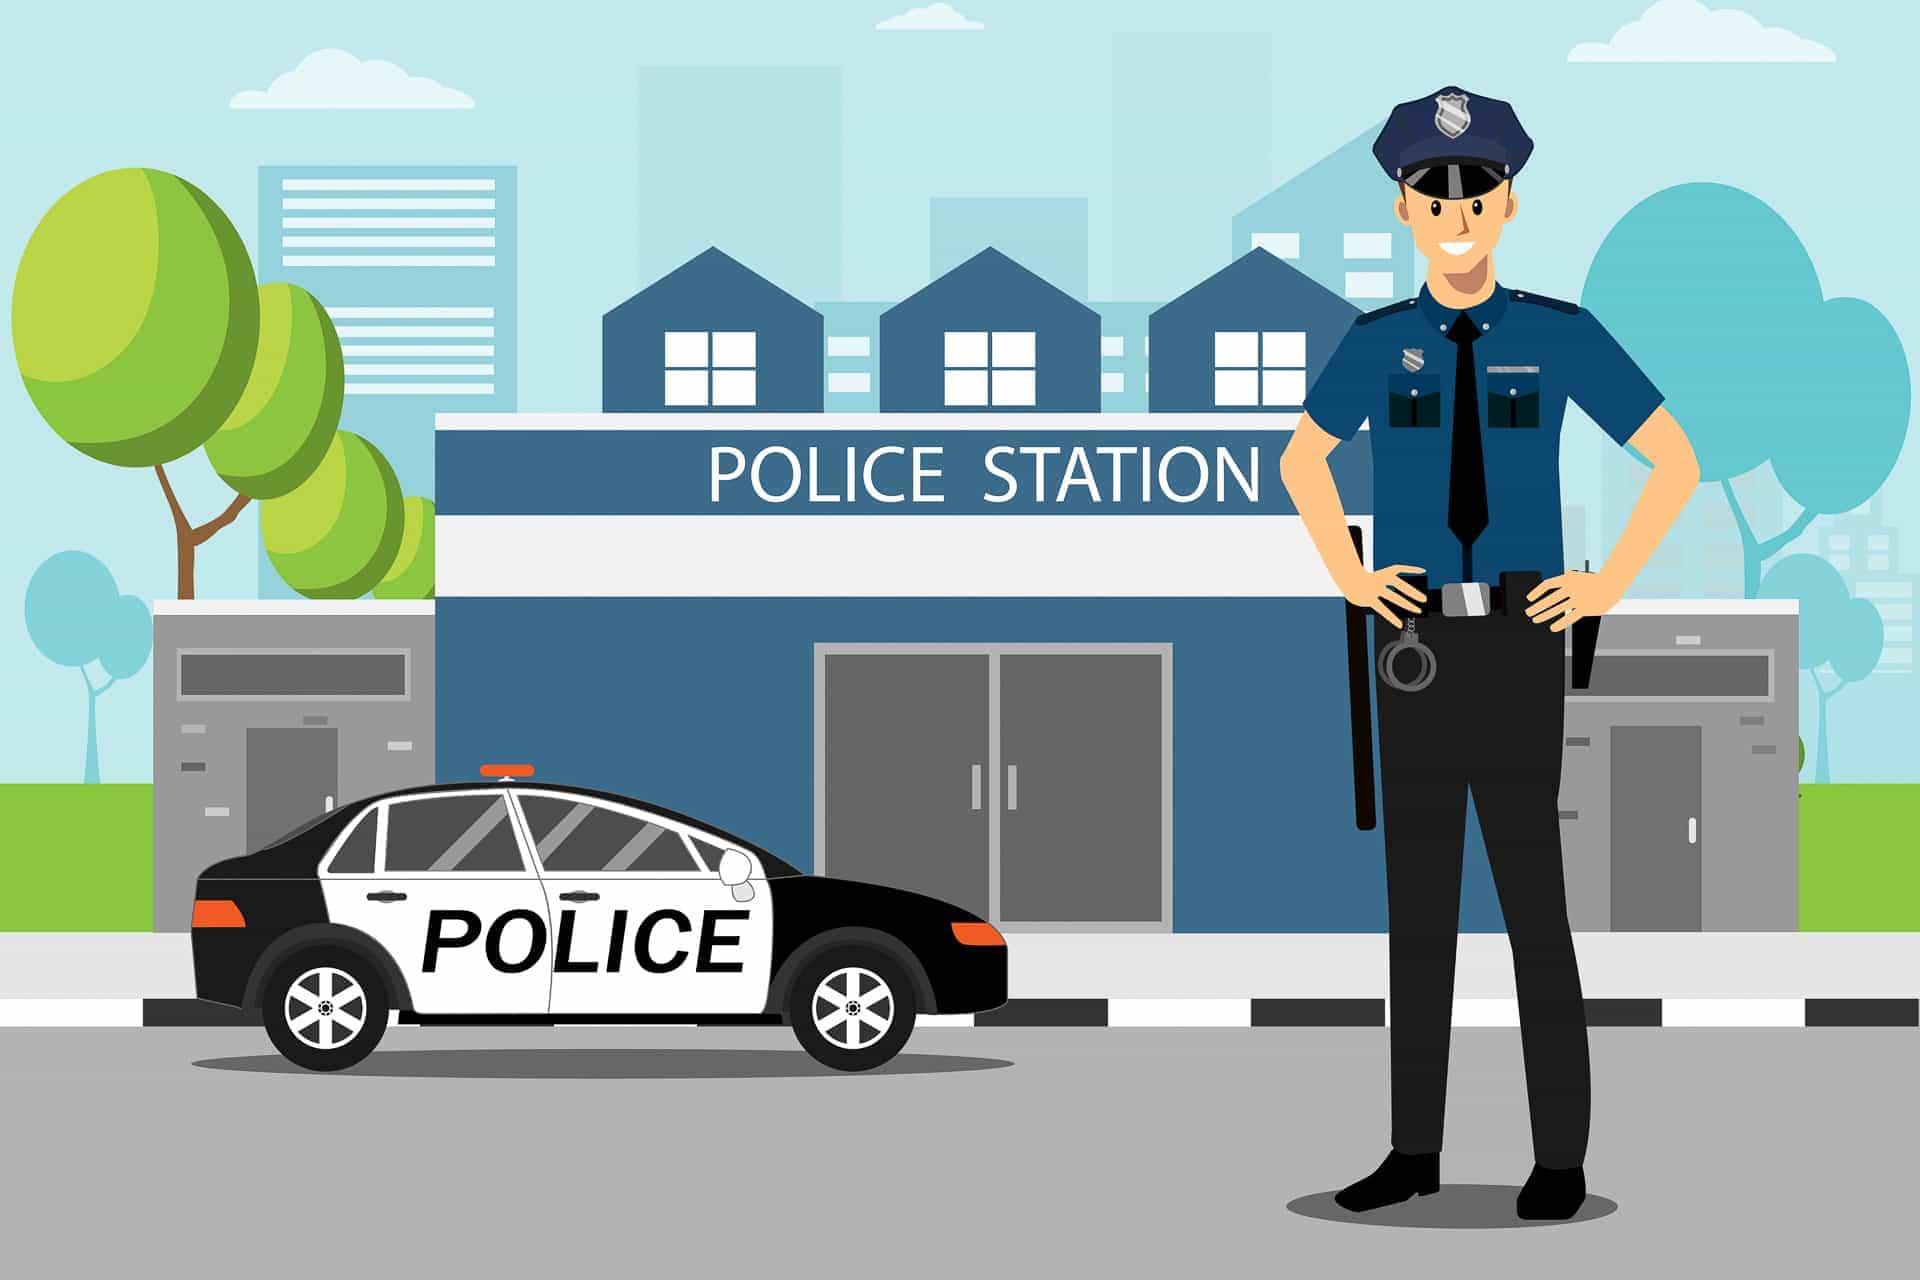 Police and police station